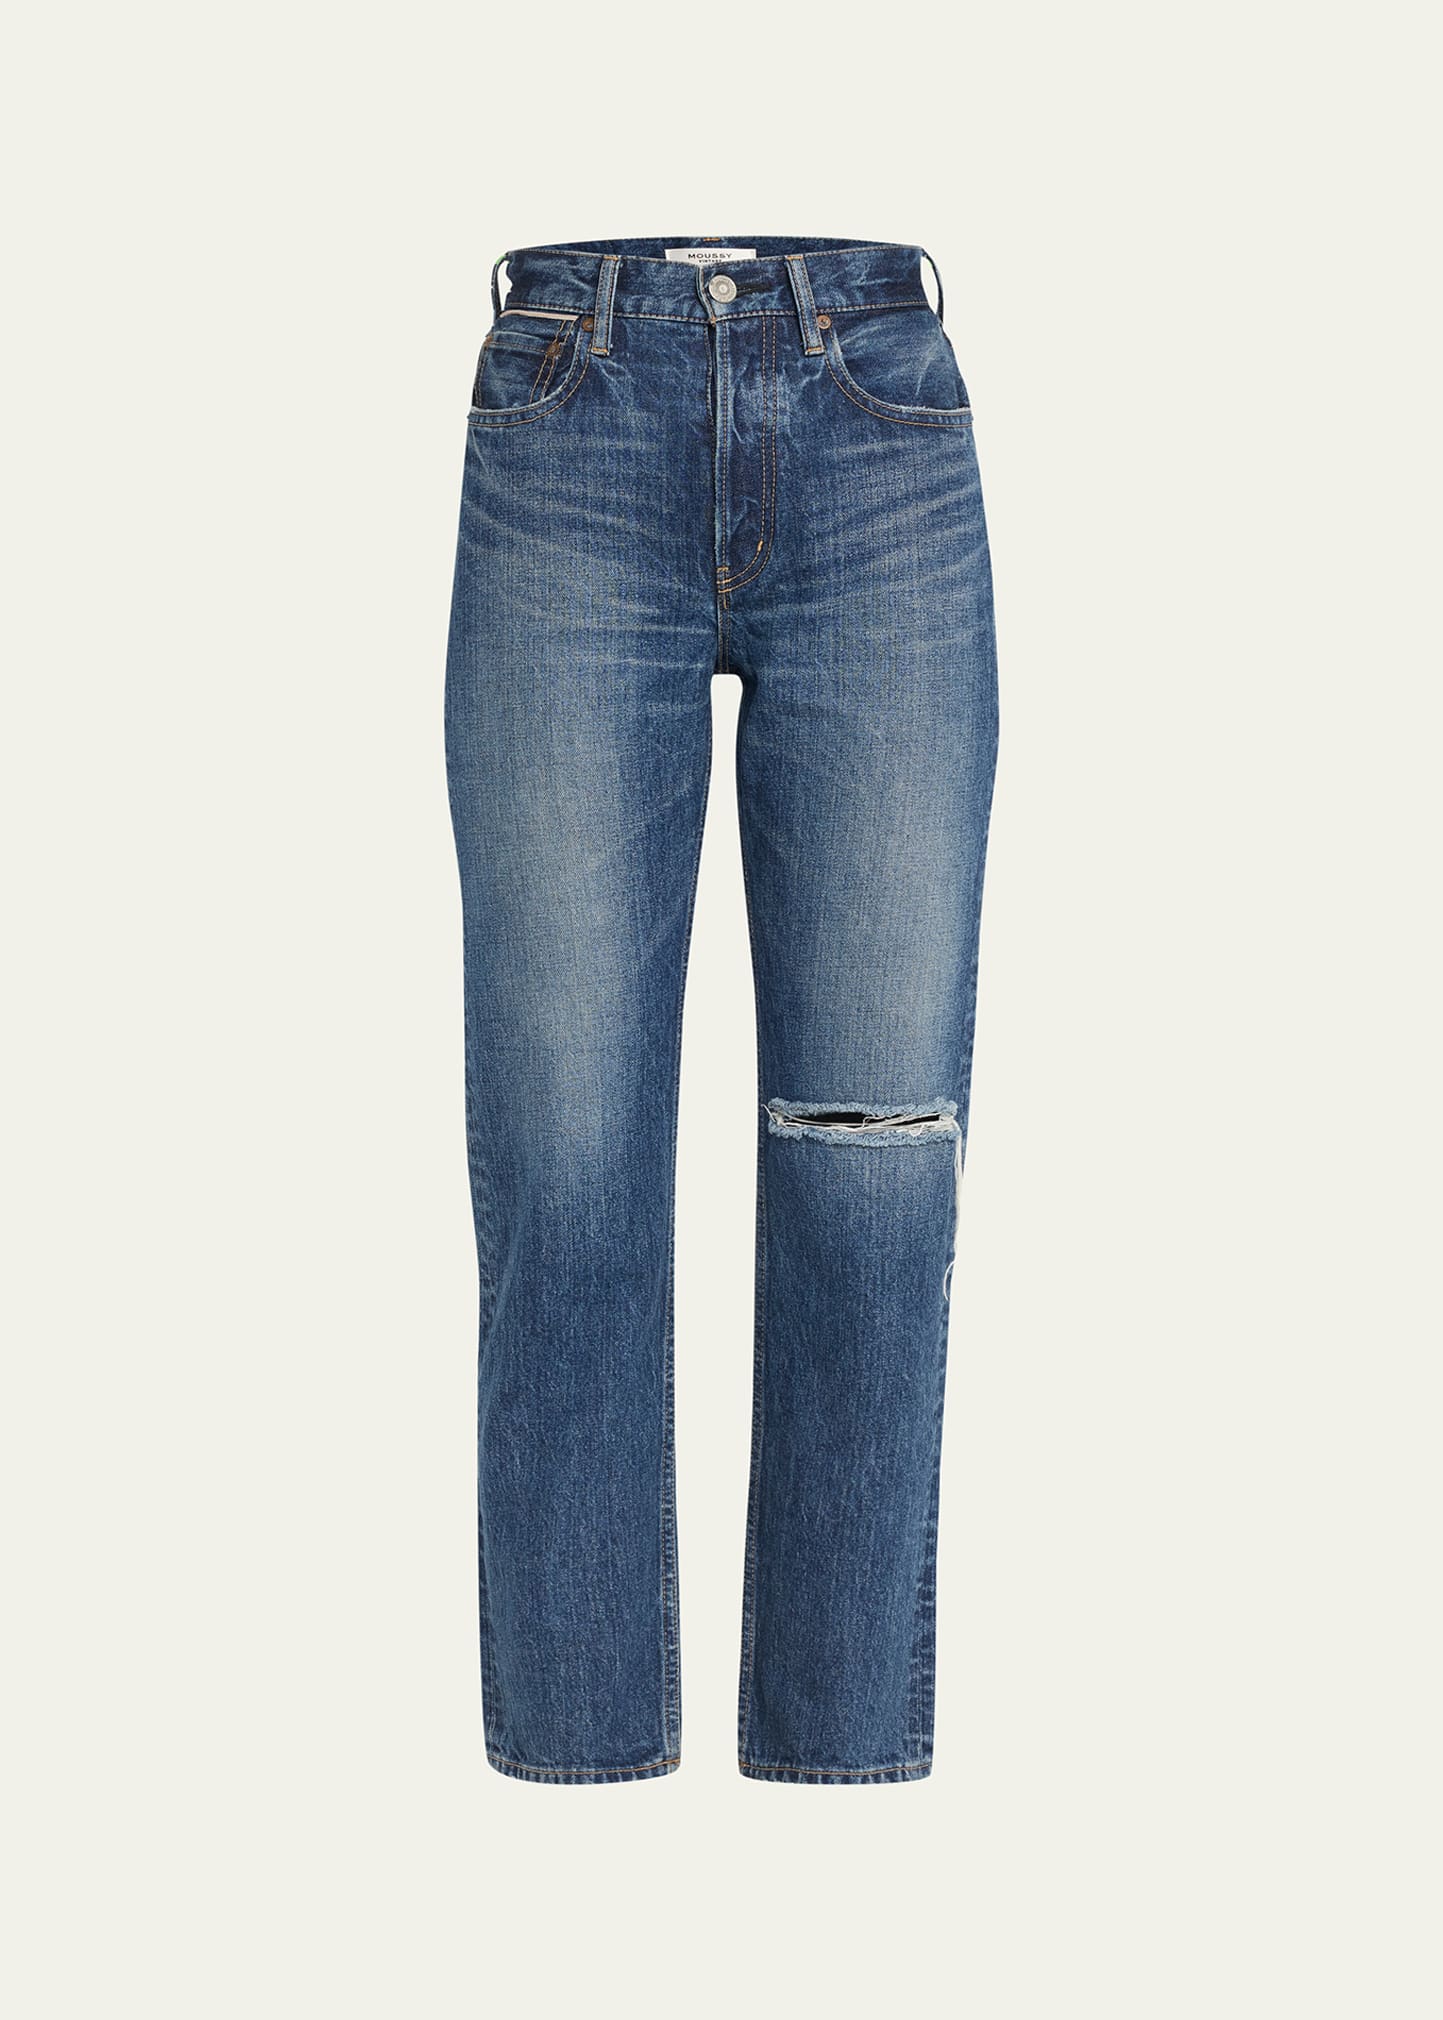 Widstoe Distressed Wide-Straight Jeans